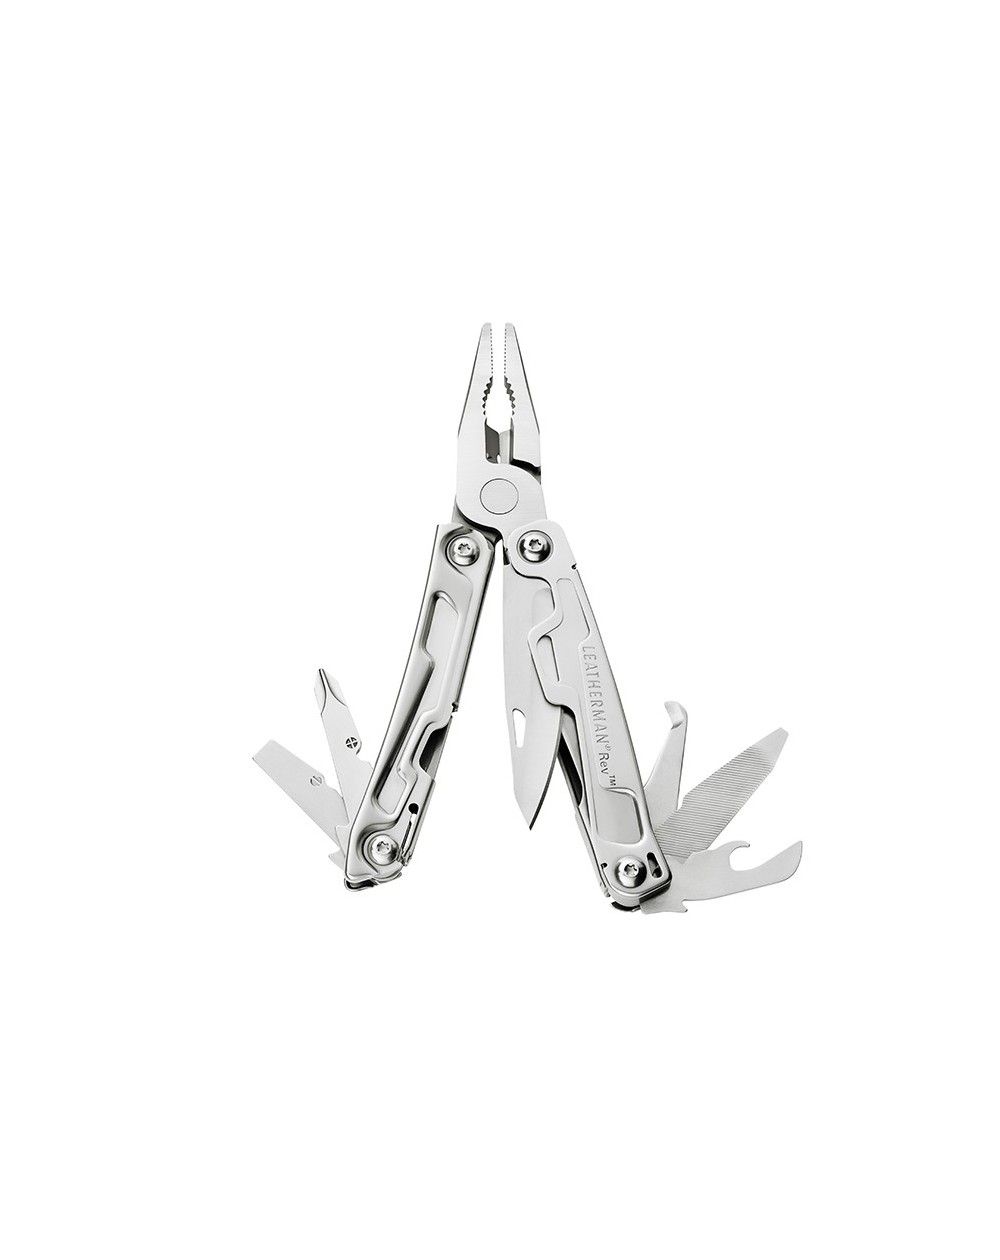 leatherman-pince-multifonctions-rev-blister-832129-1